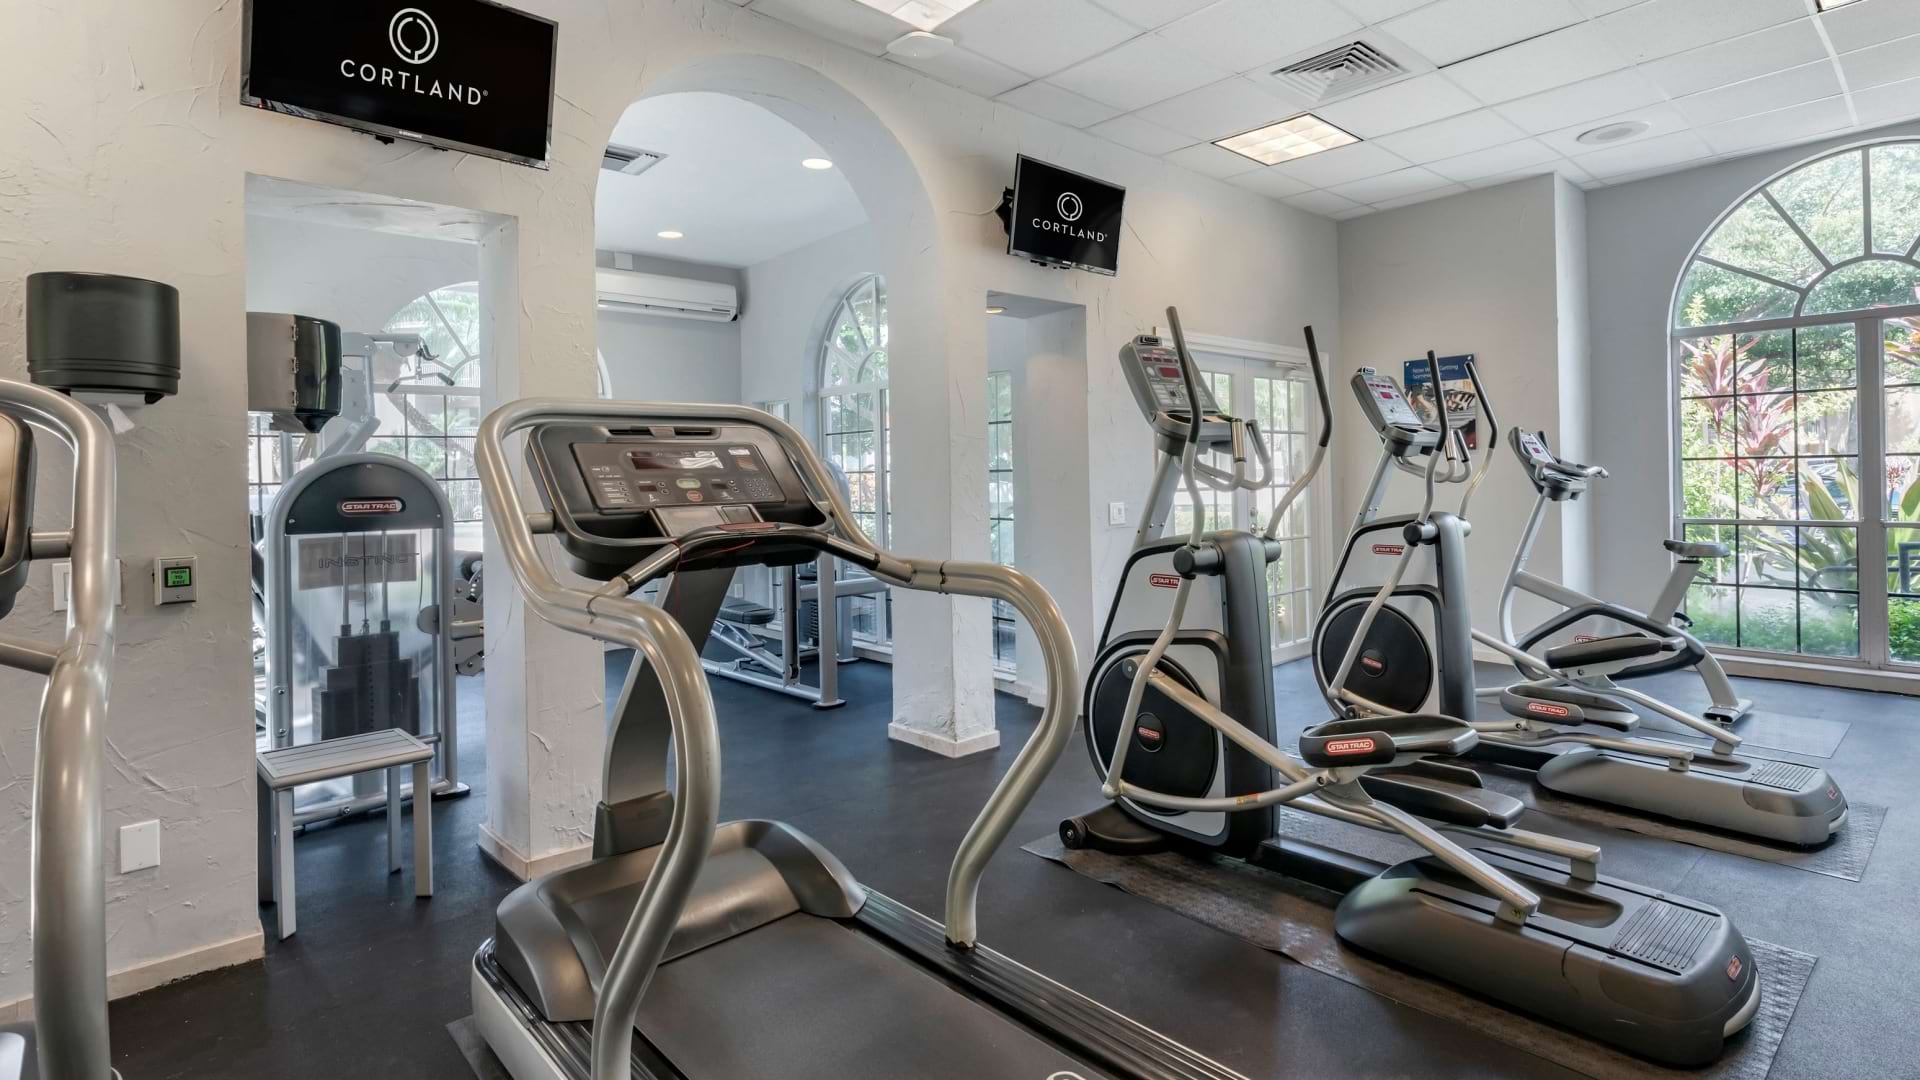 Cardio Machines and HDTVs at Our West Kendall Apartment 24/7 Fitness Center